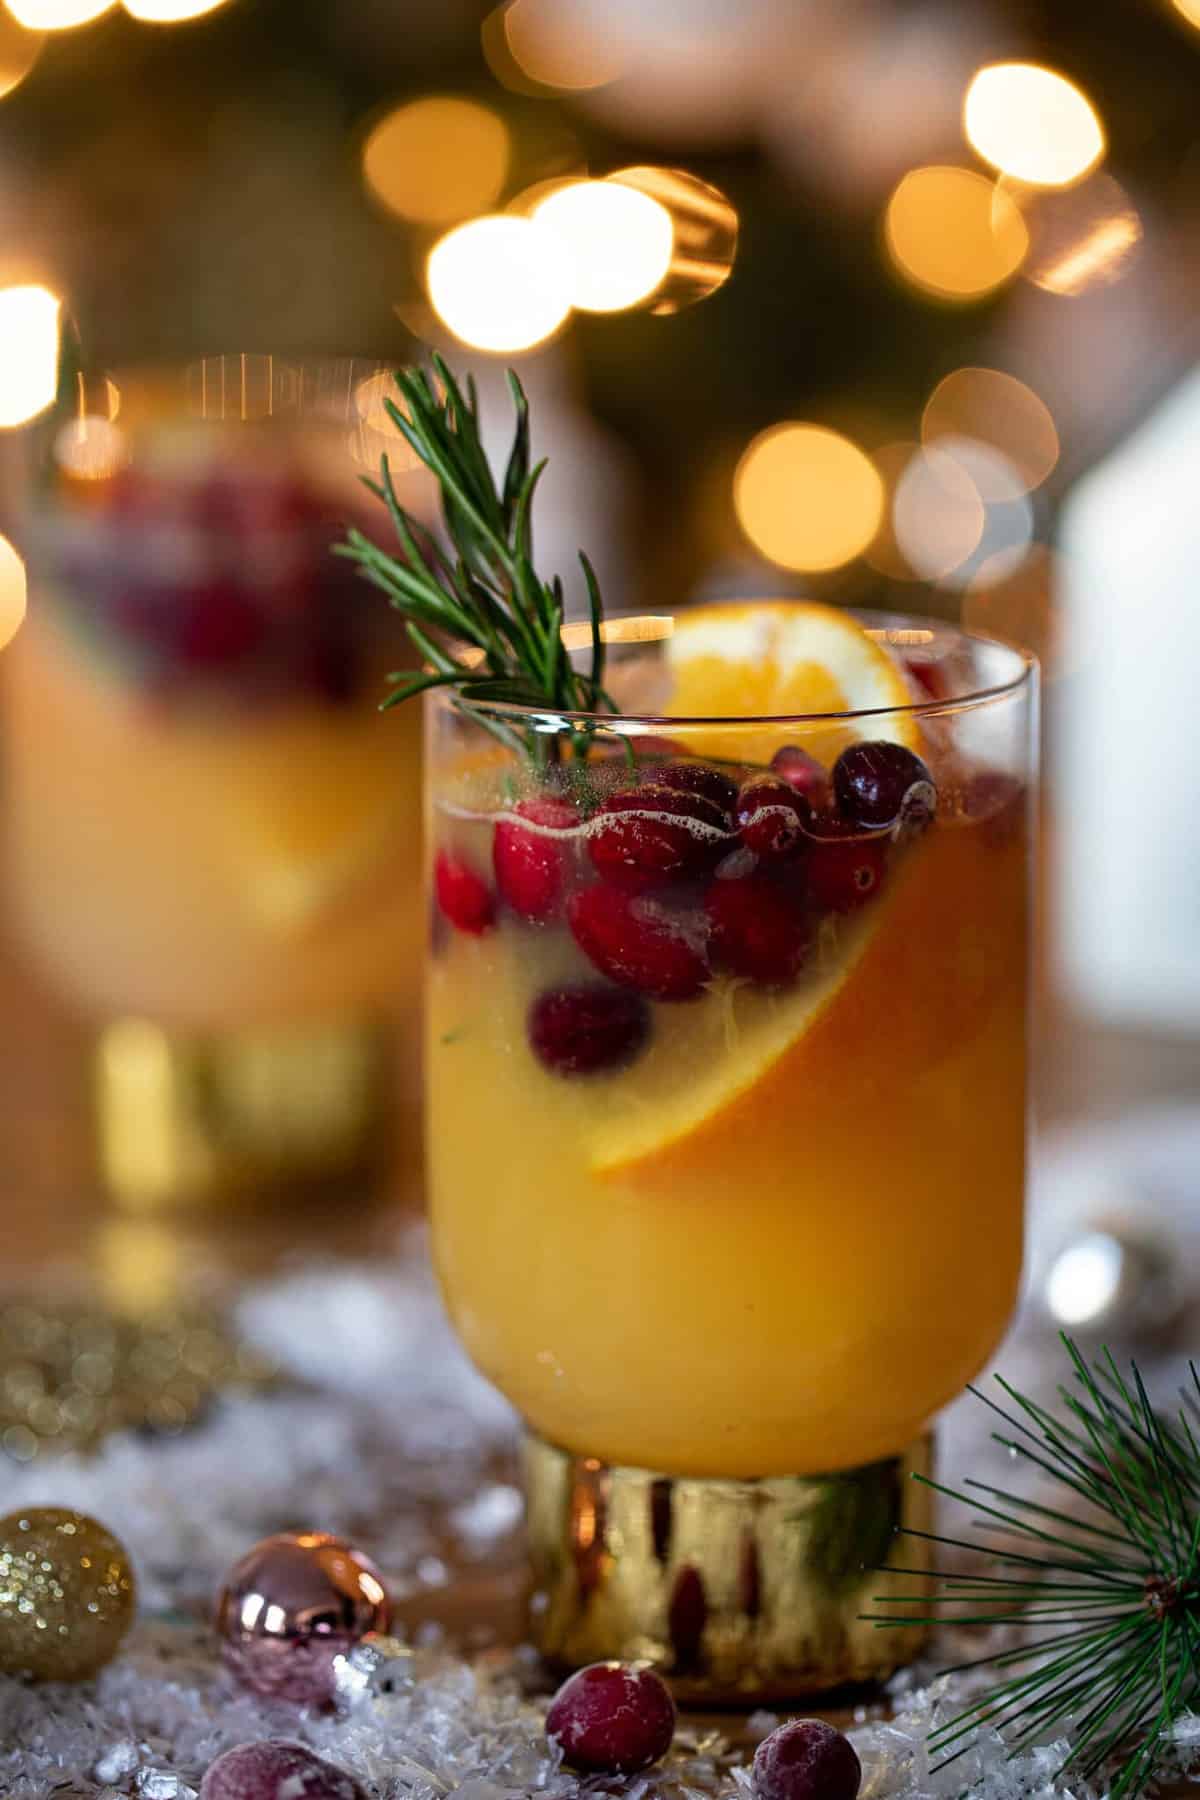 Sparkling Cranberry Orange Ginger Mocktail in a small glass with a golden base